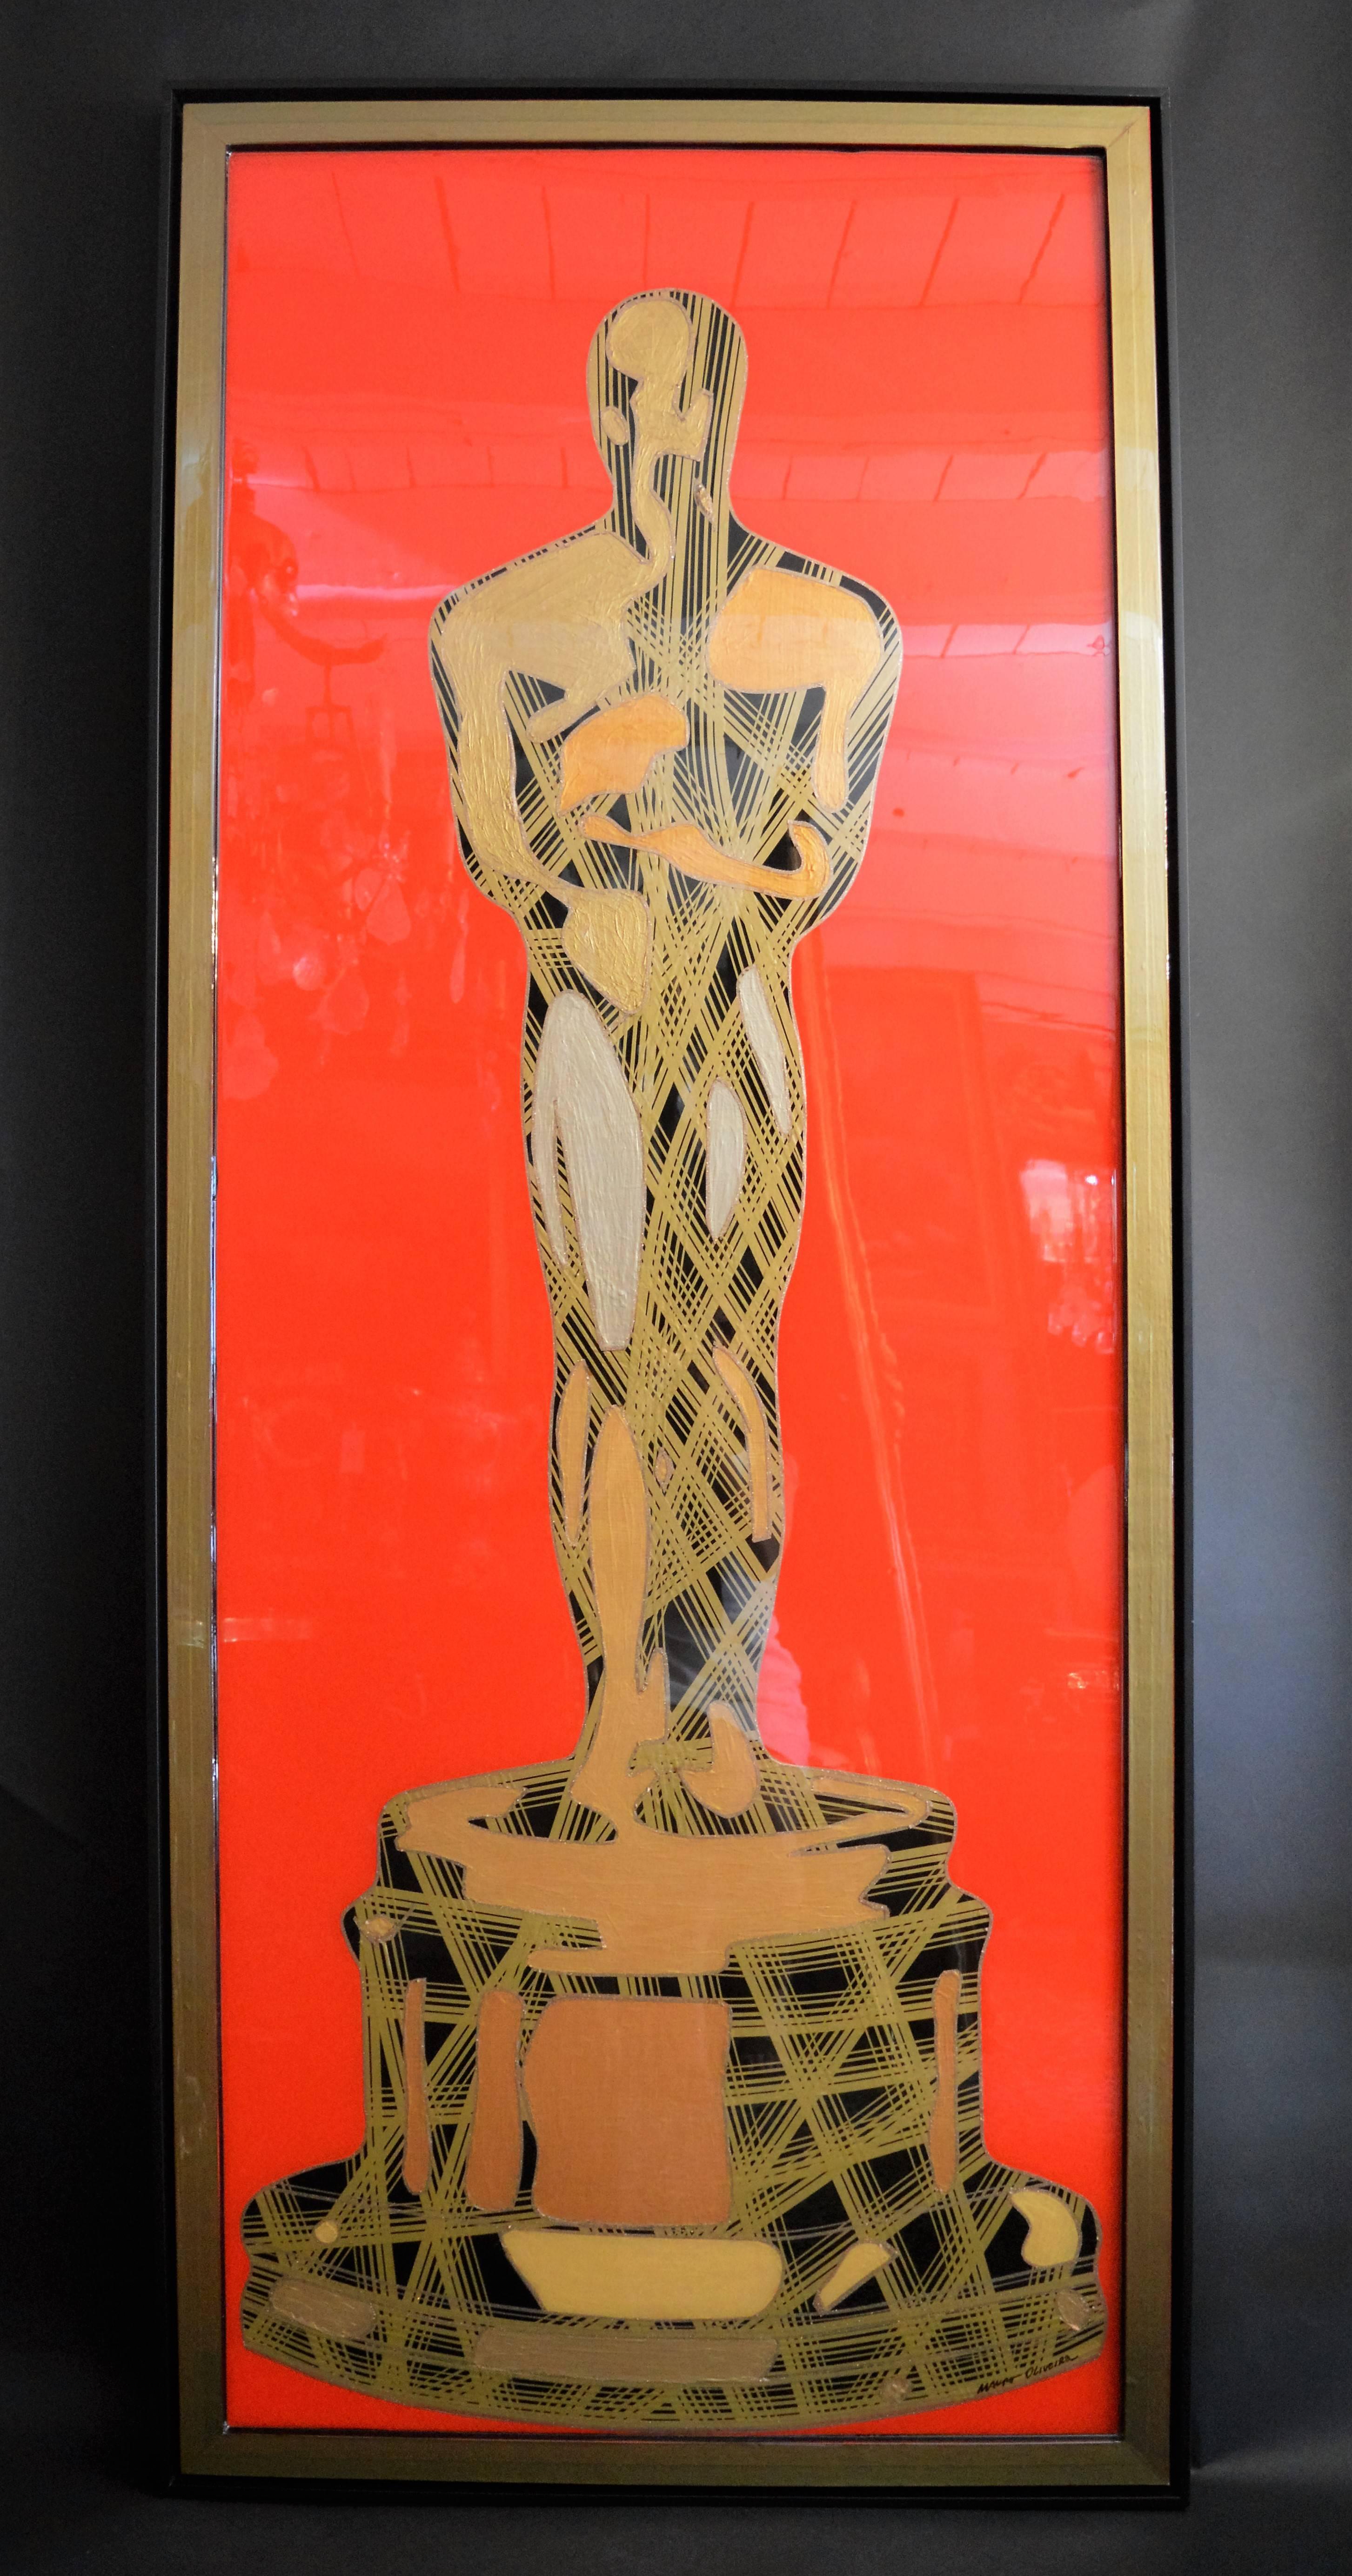 Mauro Oliveira started the historic Oscar series. An original take on the most important and iconic award in the world. Each one is one of a kind.